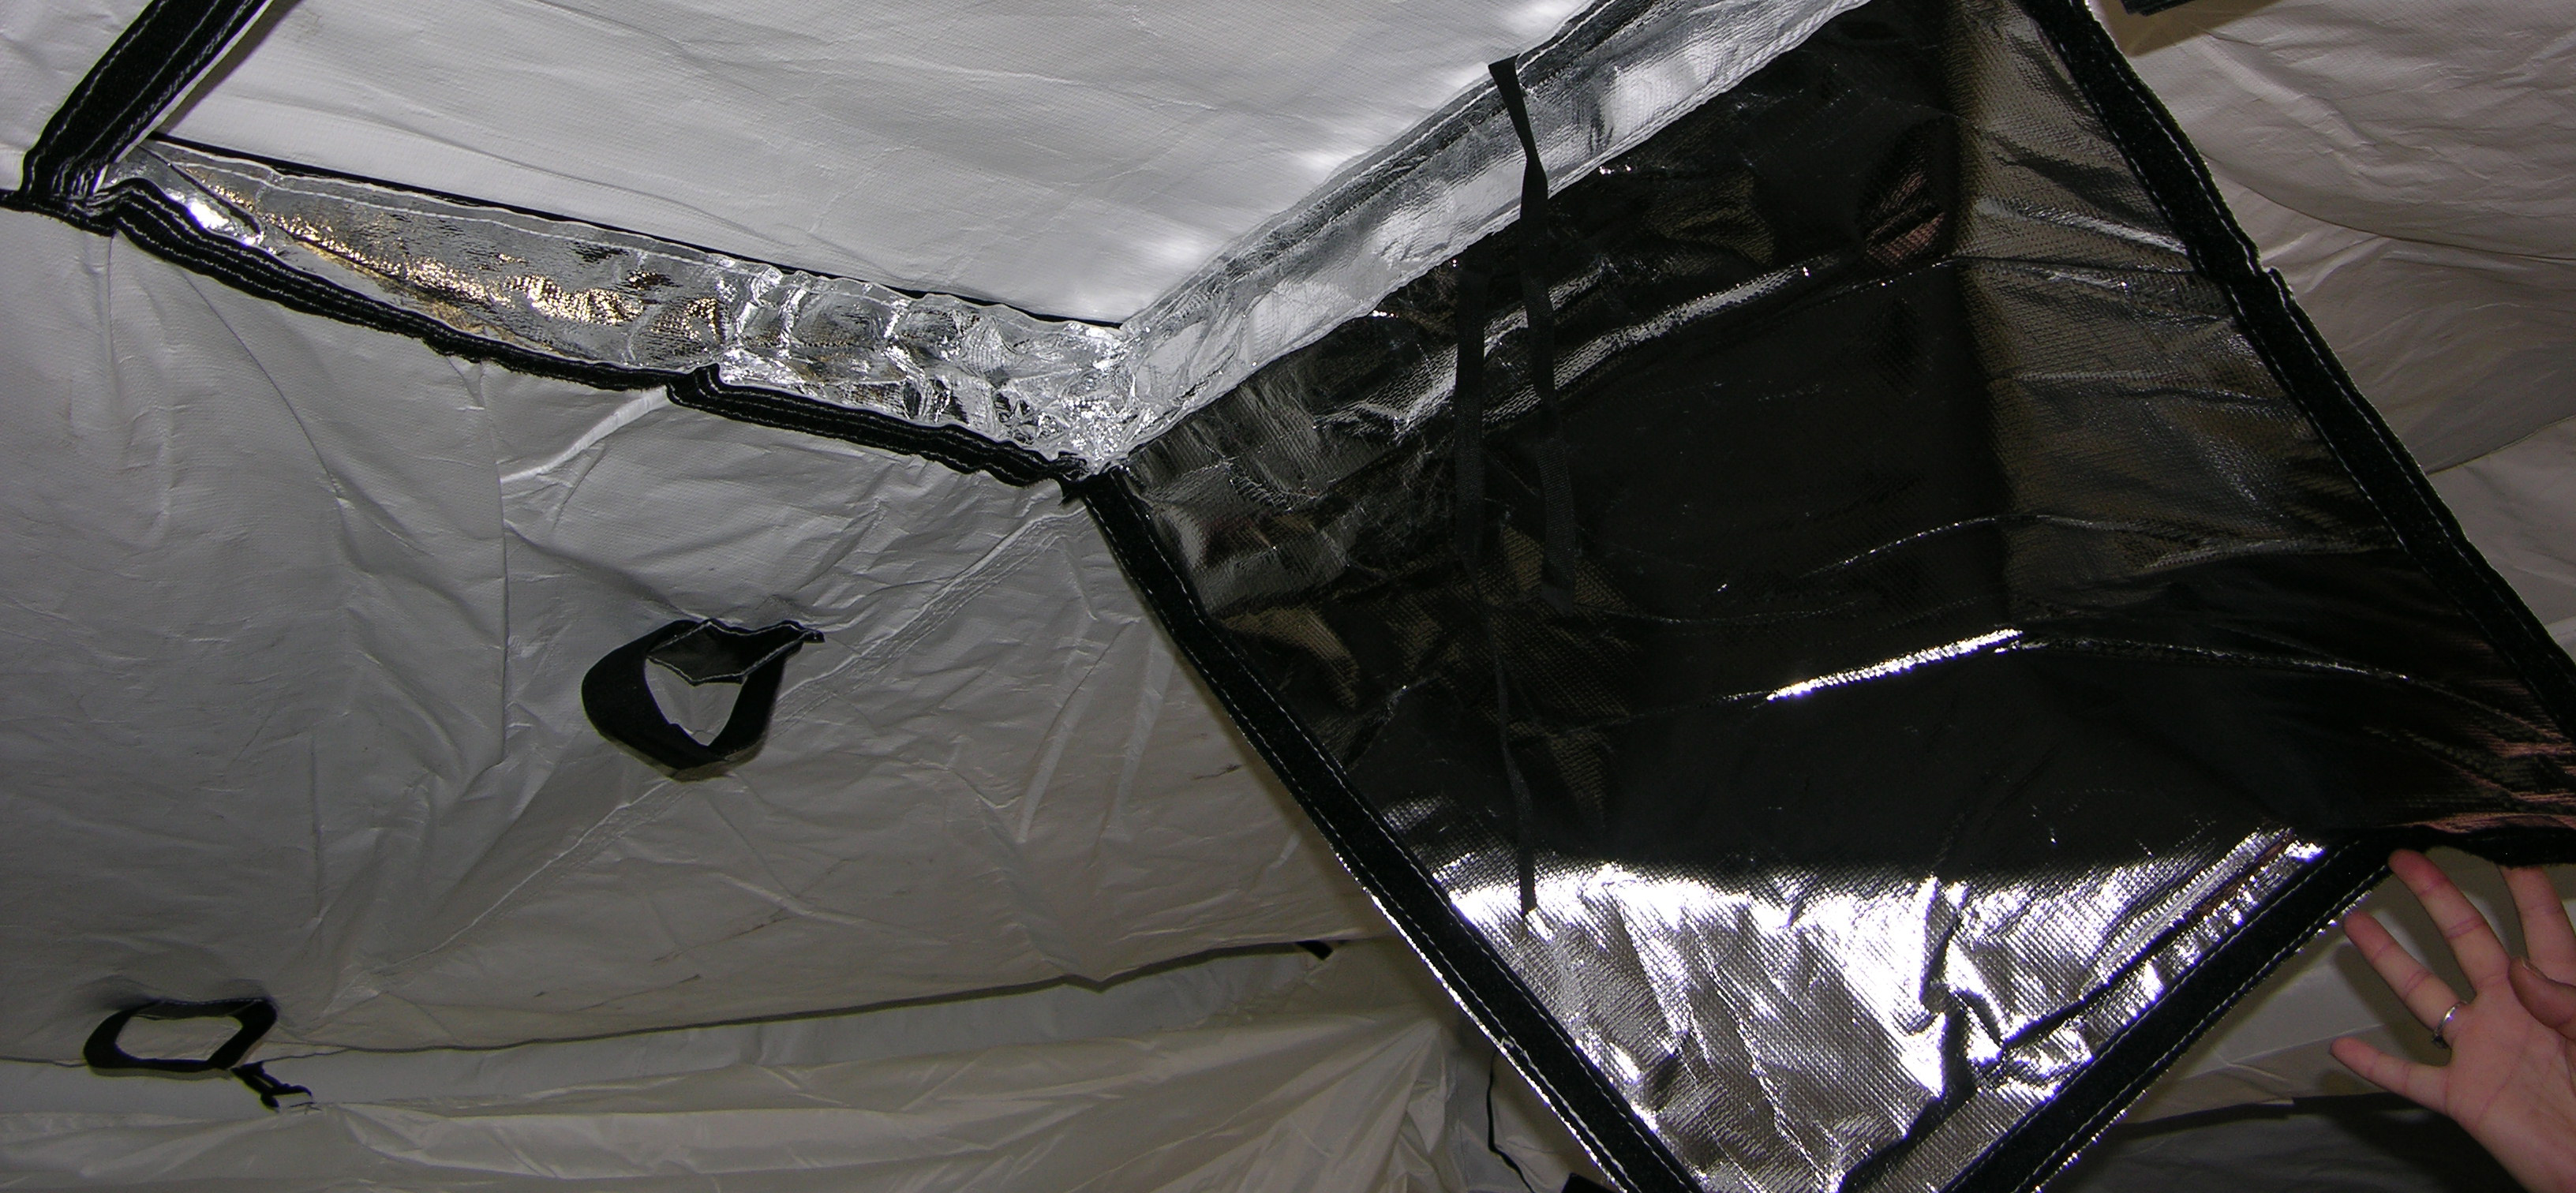 Military Tent Insulation back on the agenda - Polar Thermal